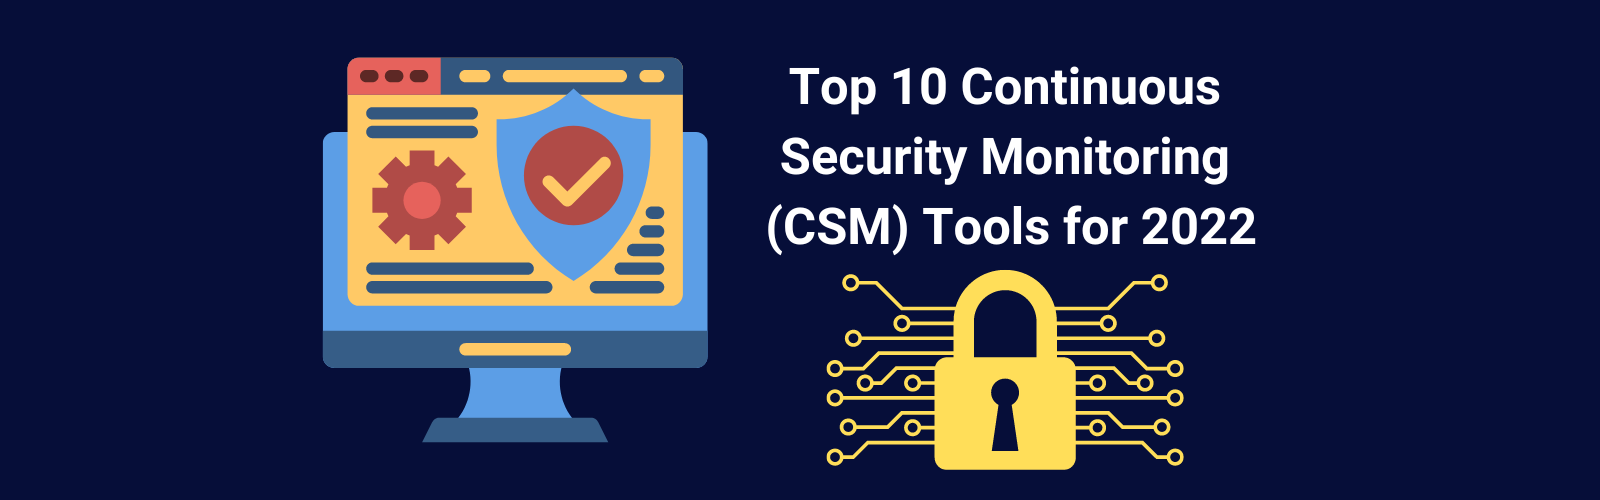 Top 10 Continuous Security Monitoring (CSM) Tools for {year} main image